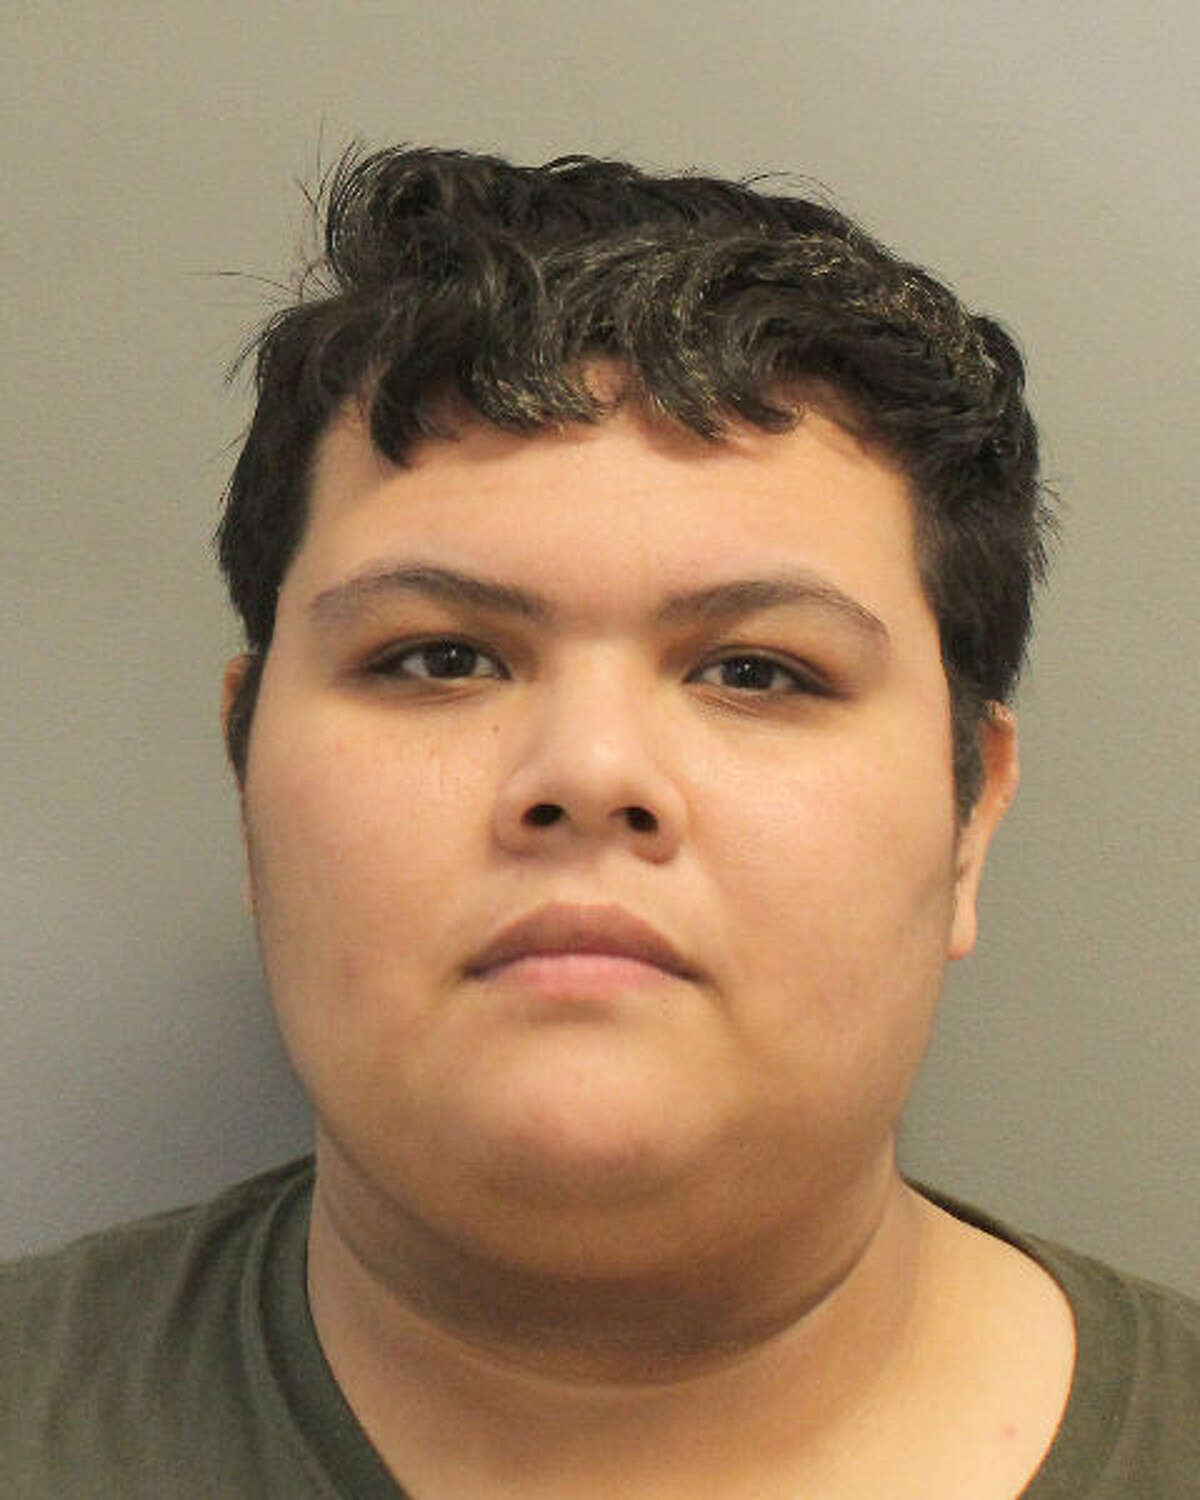 Alma Rico, 26, has been arrested and charged with murder, tampering with evidence and aggravated assault with a deadly weapon in connection to the fatal shooting death of 23-year-old Cristino Resendiz Garcia on March 9.